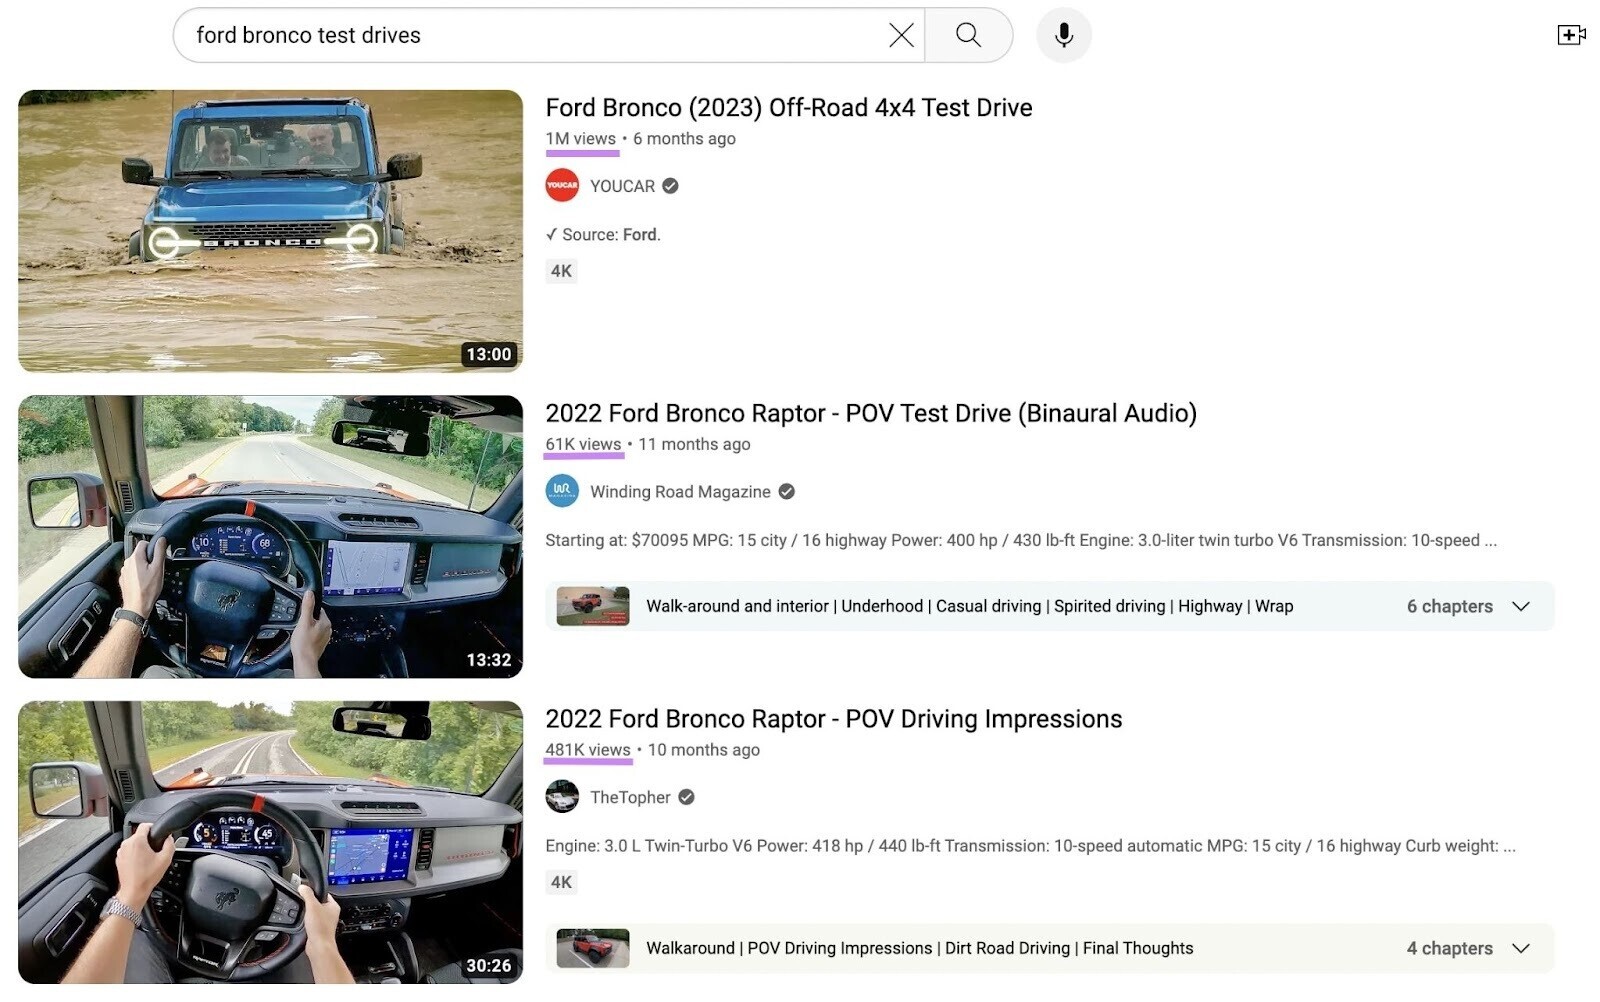 YouTube results for "ford bronco test drives" query